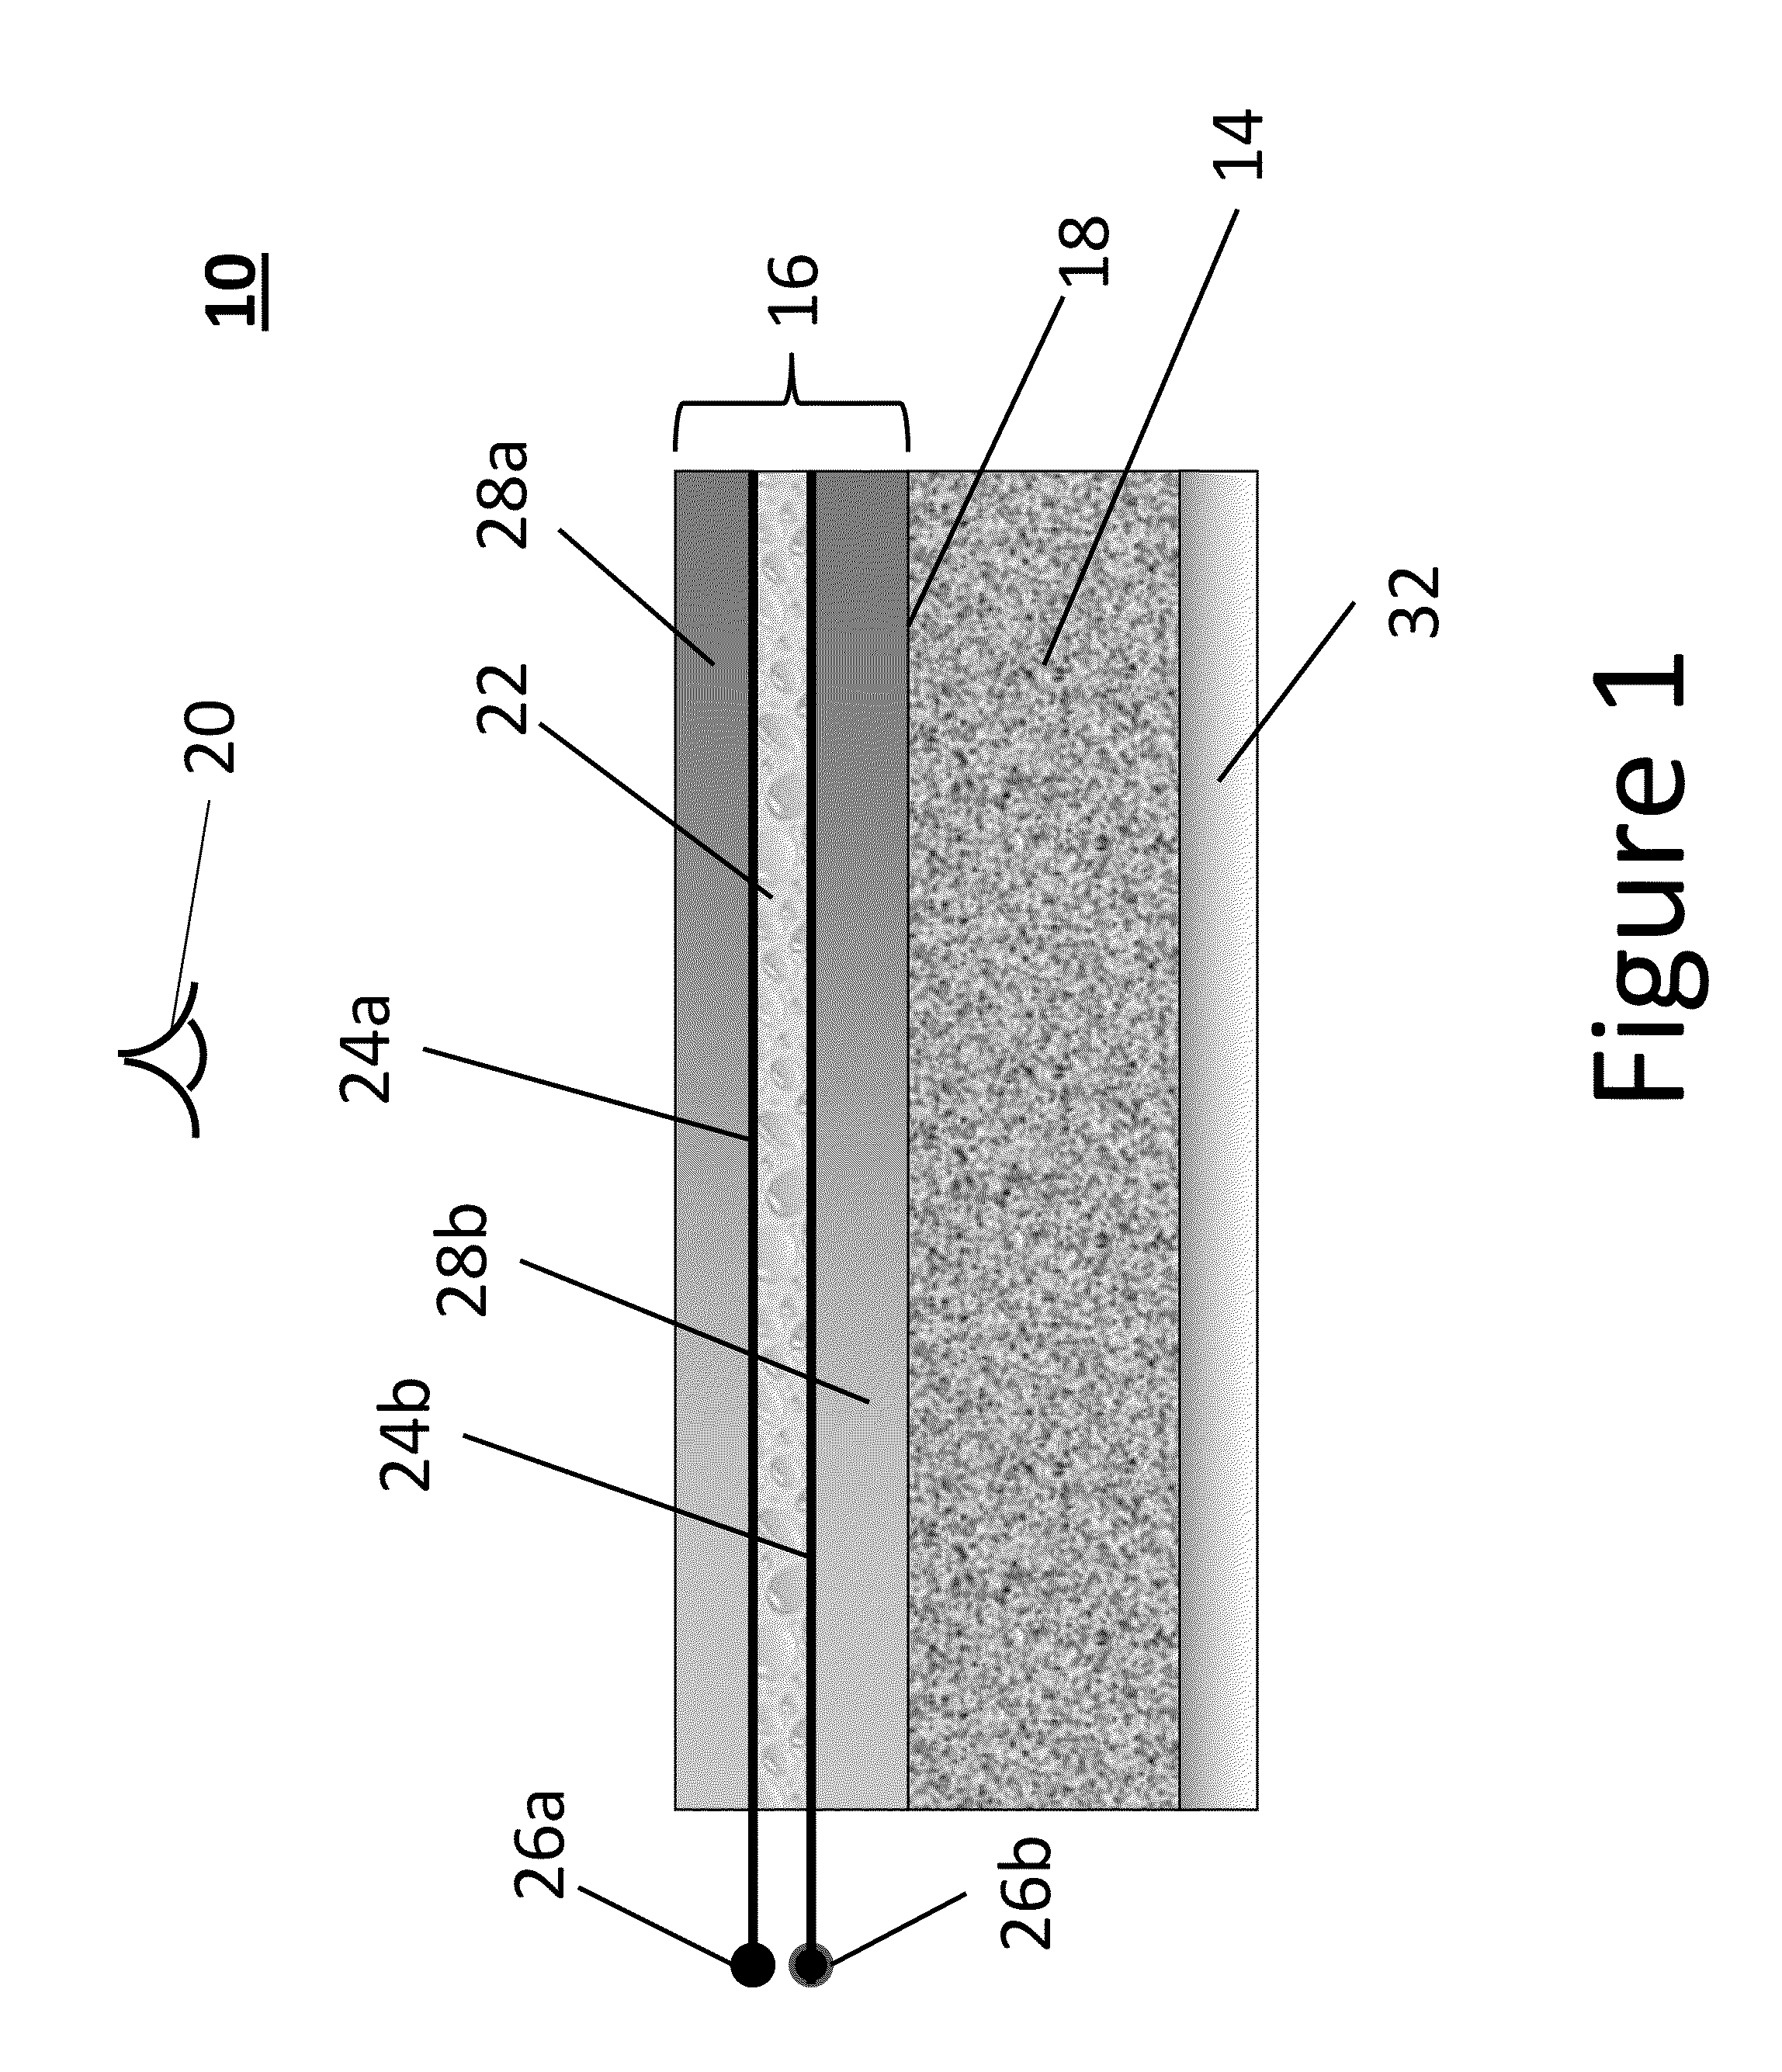 Display with overlayed electronic skin